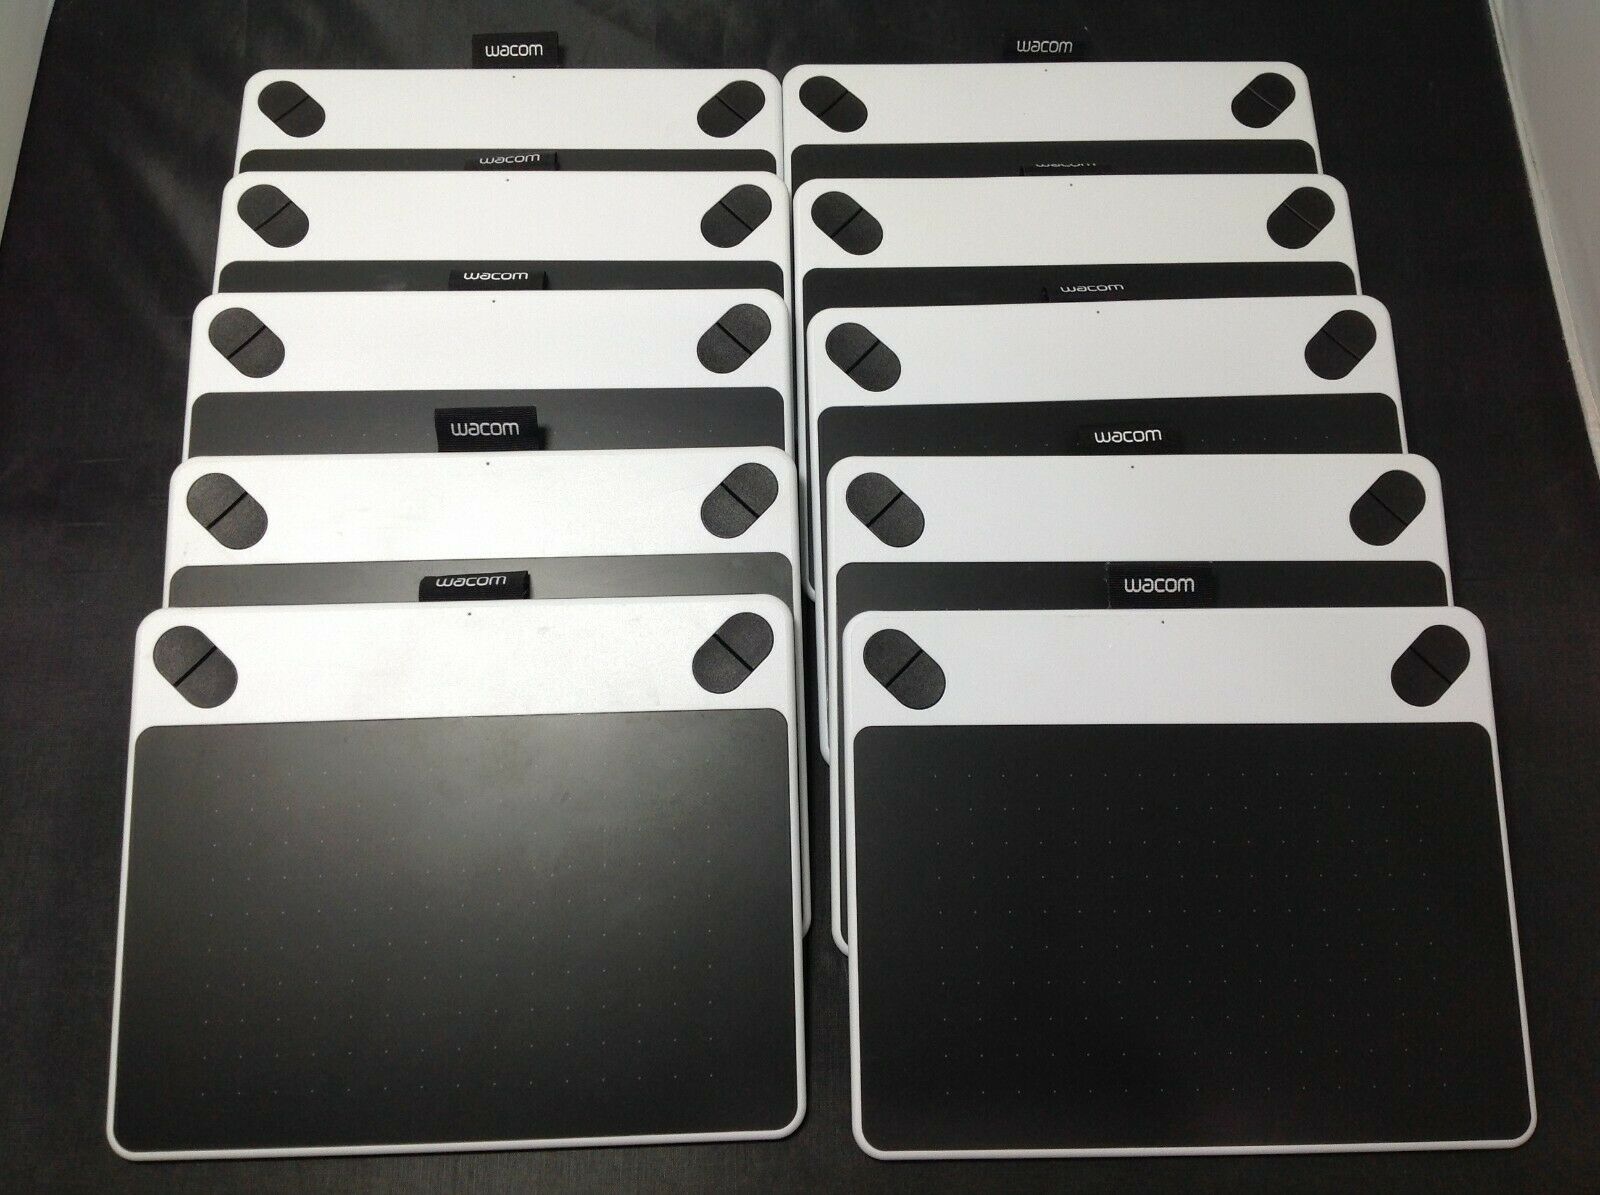 Lot of 10 Wacom Intuos CTL490W Digital Drawing/Graphics Tablet*Tablet ONLY*works